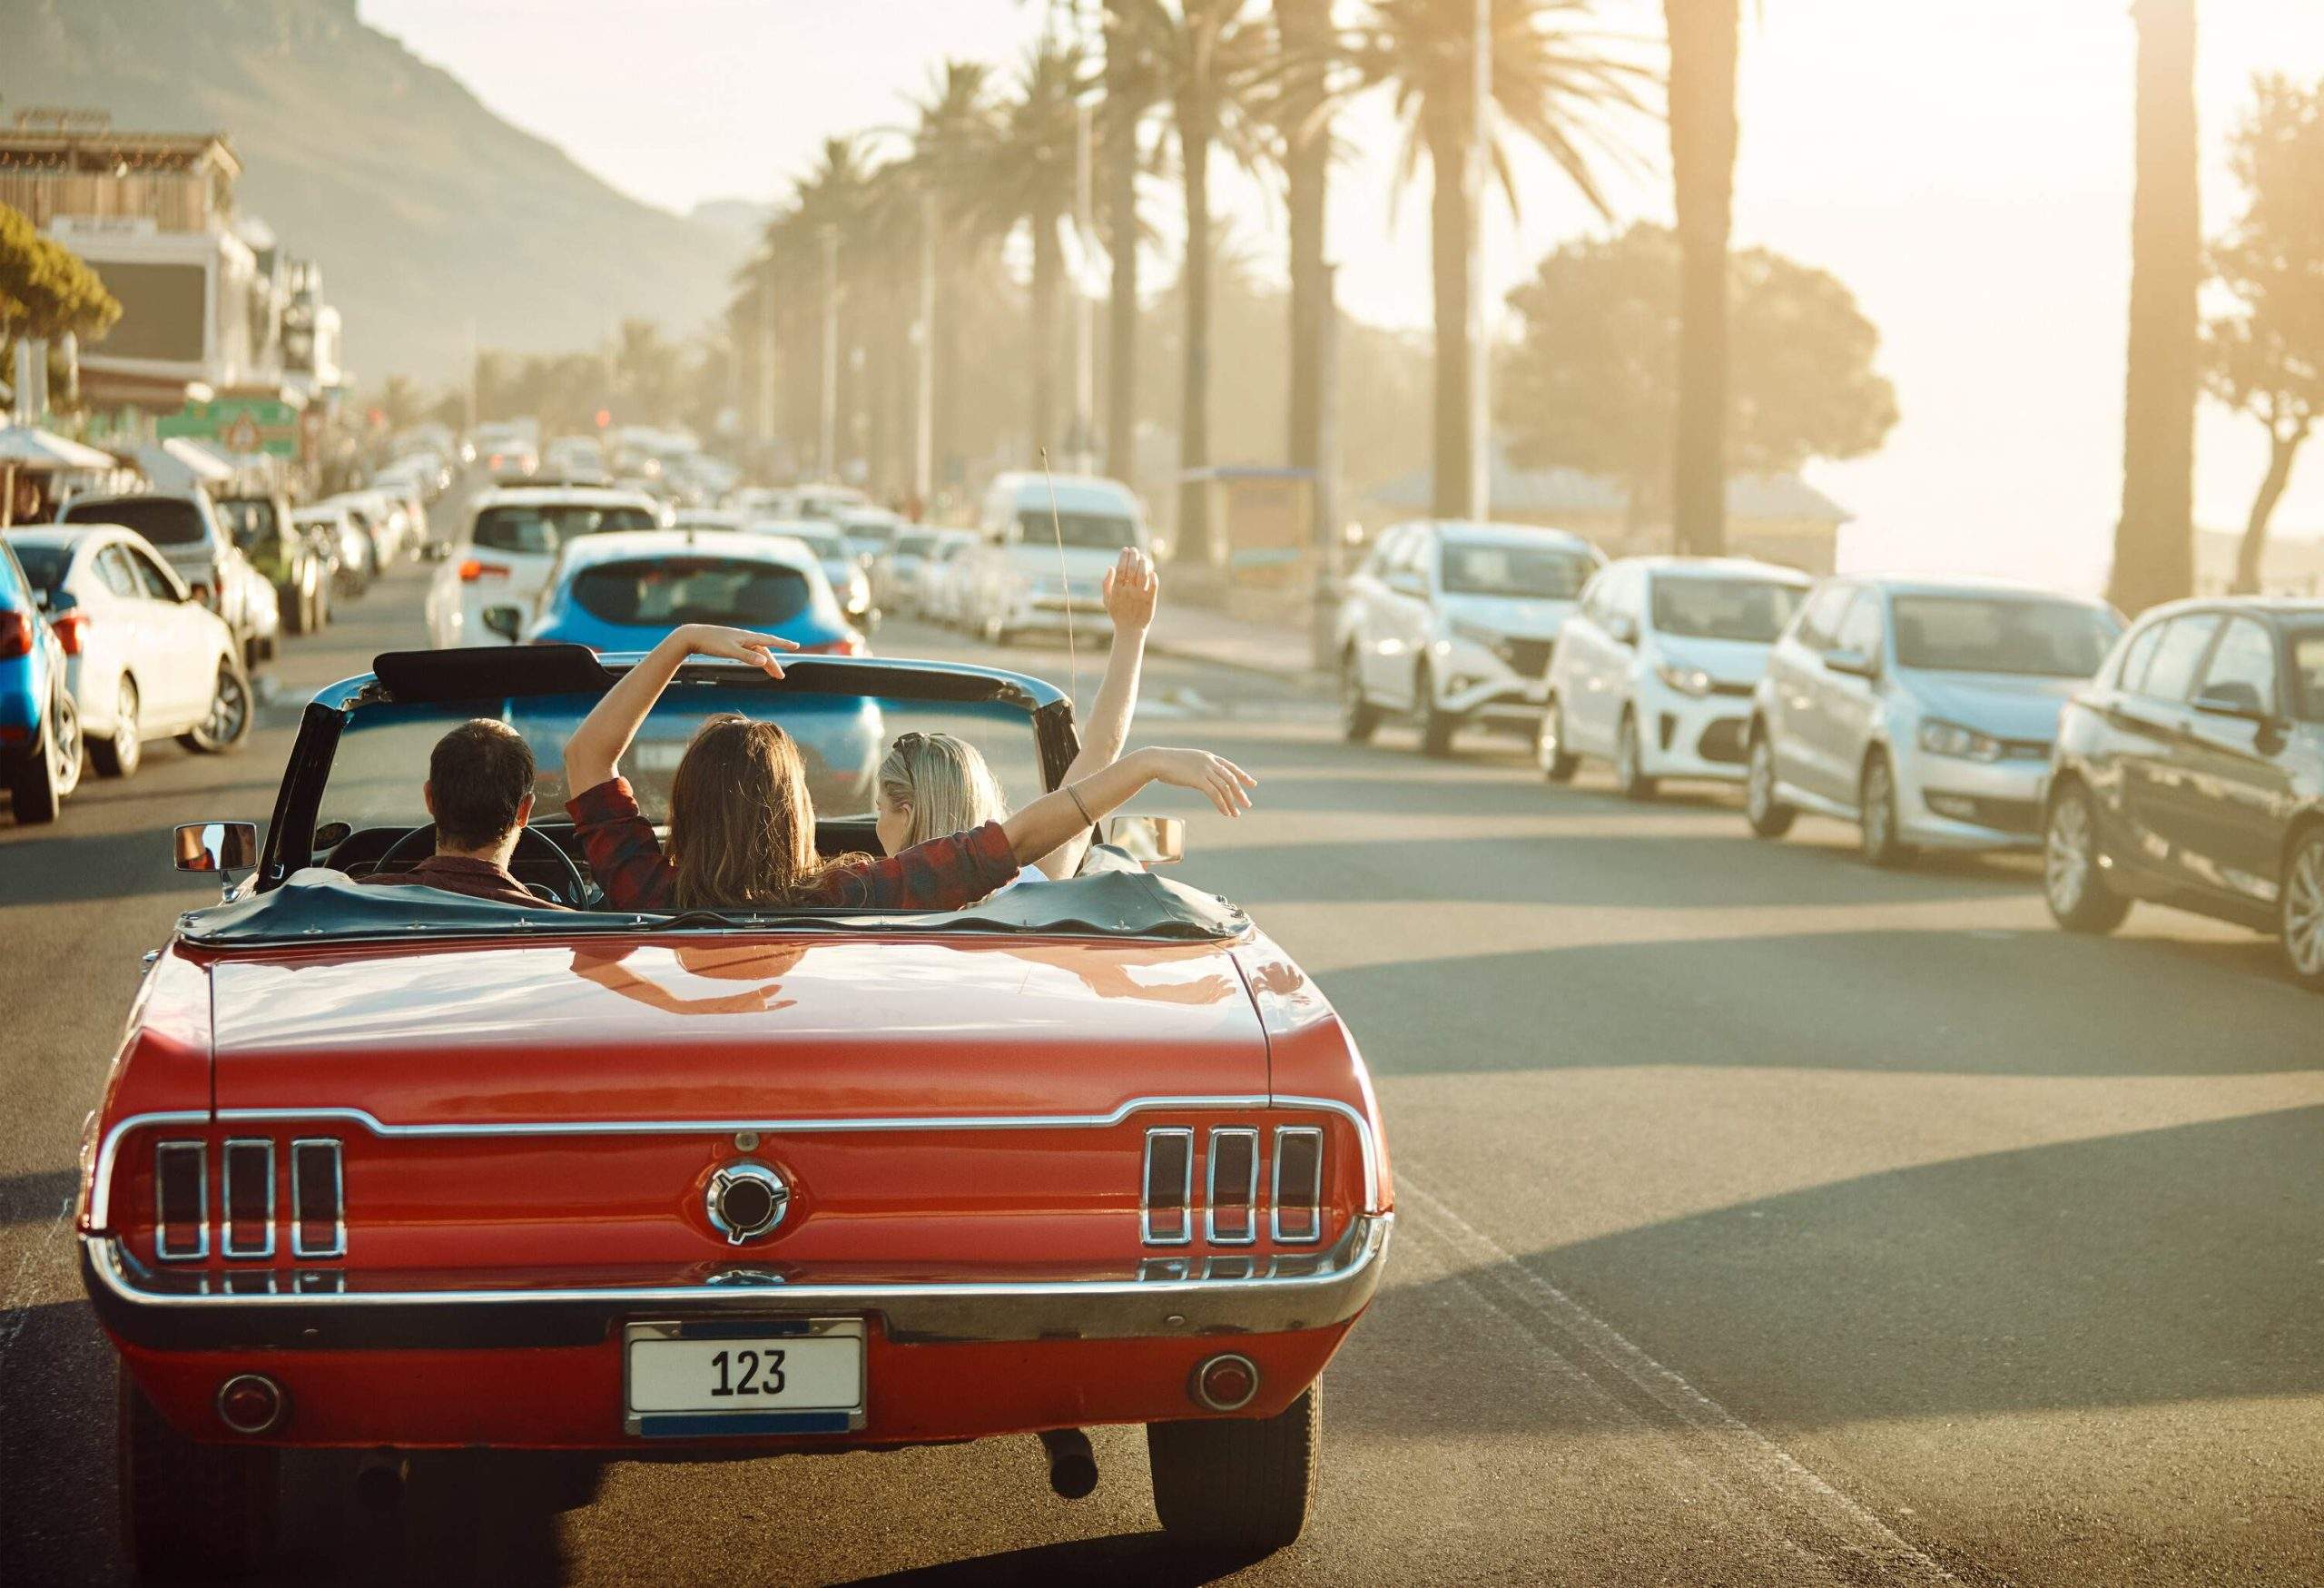 A joyful group of young friends captures the essence of a summer road trip, cruising in a vibrant red convertible car amidst the bustling traffic.